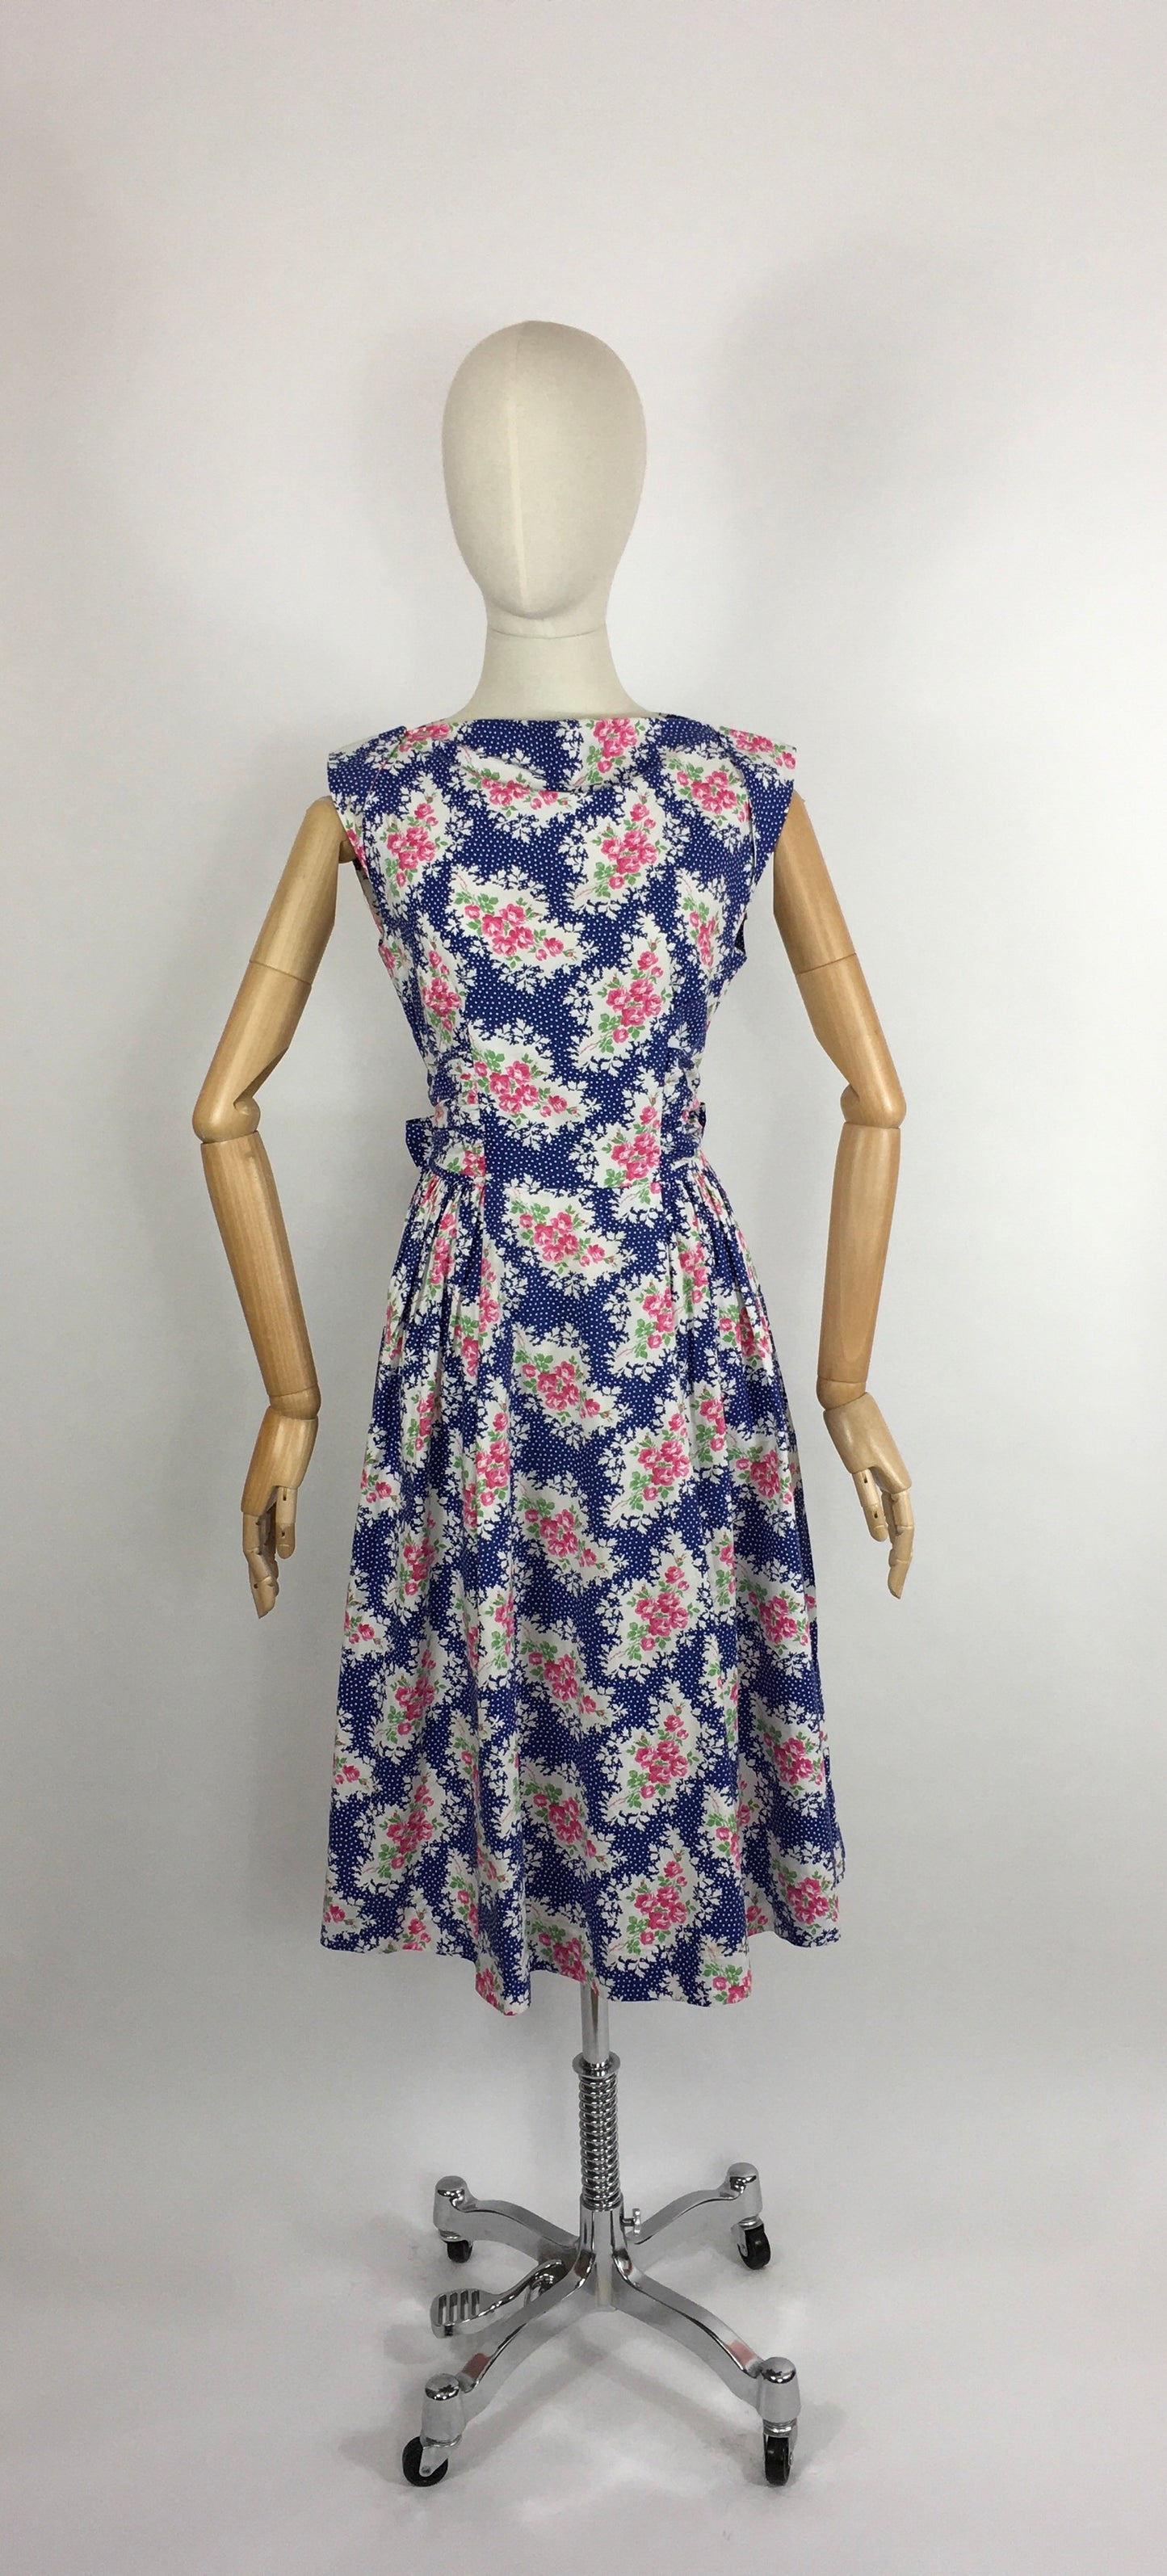 Original 1950s Darling Floral Day Dress - In a Beautiful Crisp Cotton in Rich Blue, Powder Pinks, White and Grassy Green.